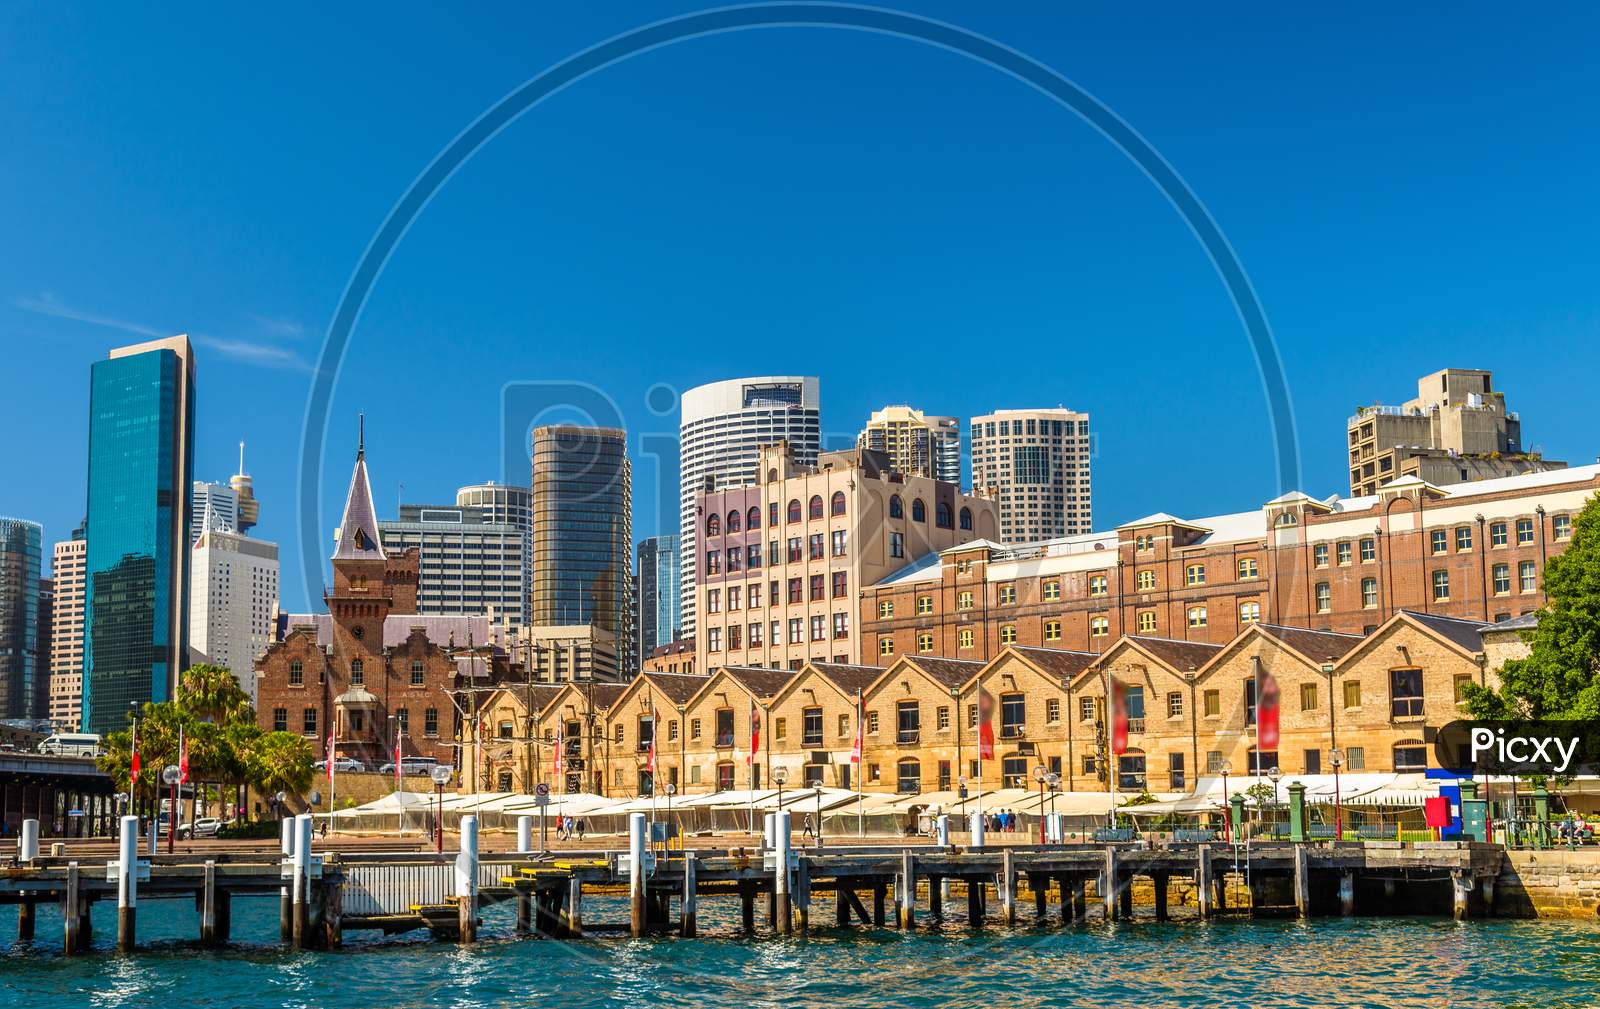 Old Warehouses At Campbell'S Cove Jetty In Sydney, Australia